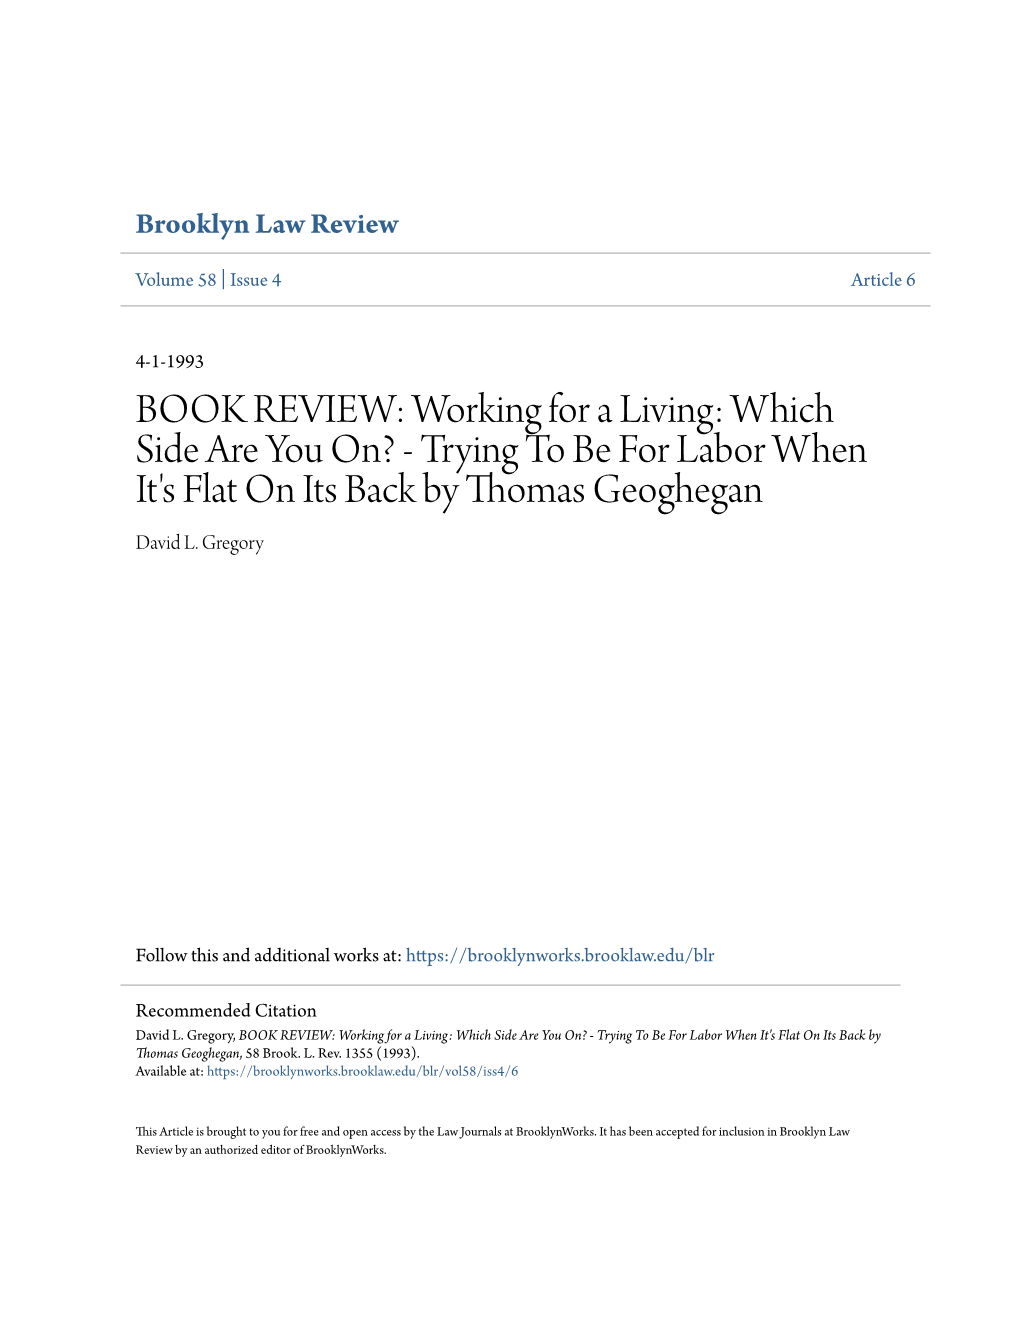 BOOK REVIEW: Working for a Living: Which Side Are You On? - Trying to Be for Labor When It's Flat on Its Back by Thomas Geoghegan David L